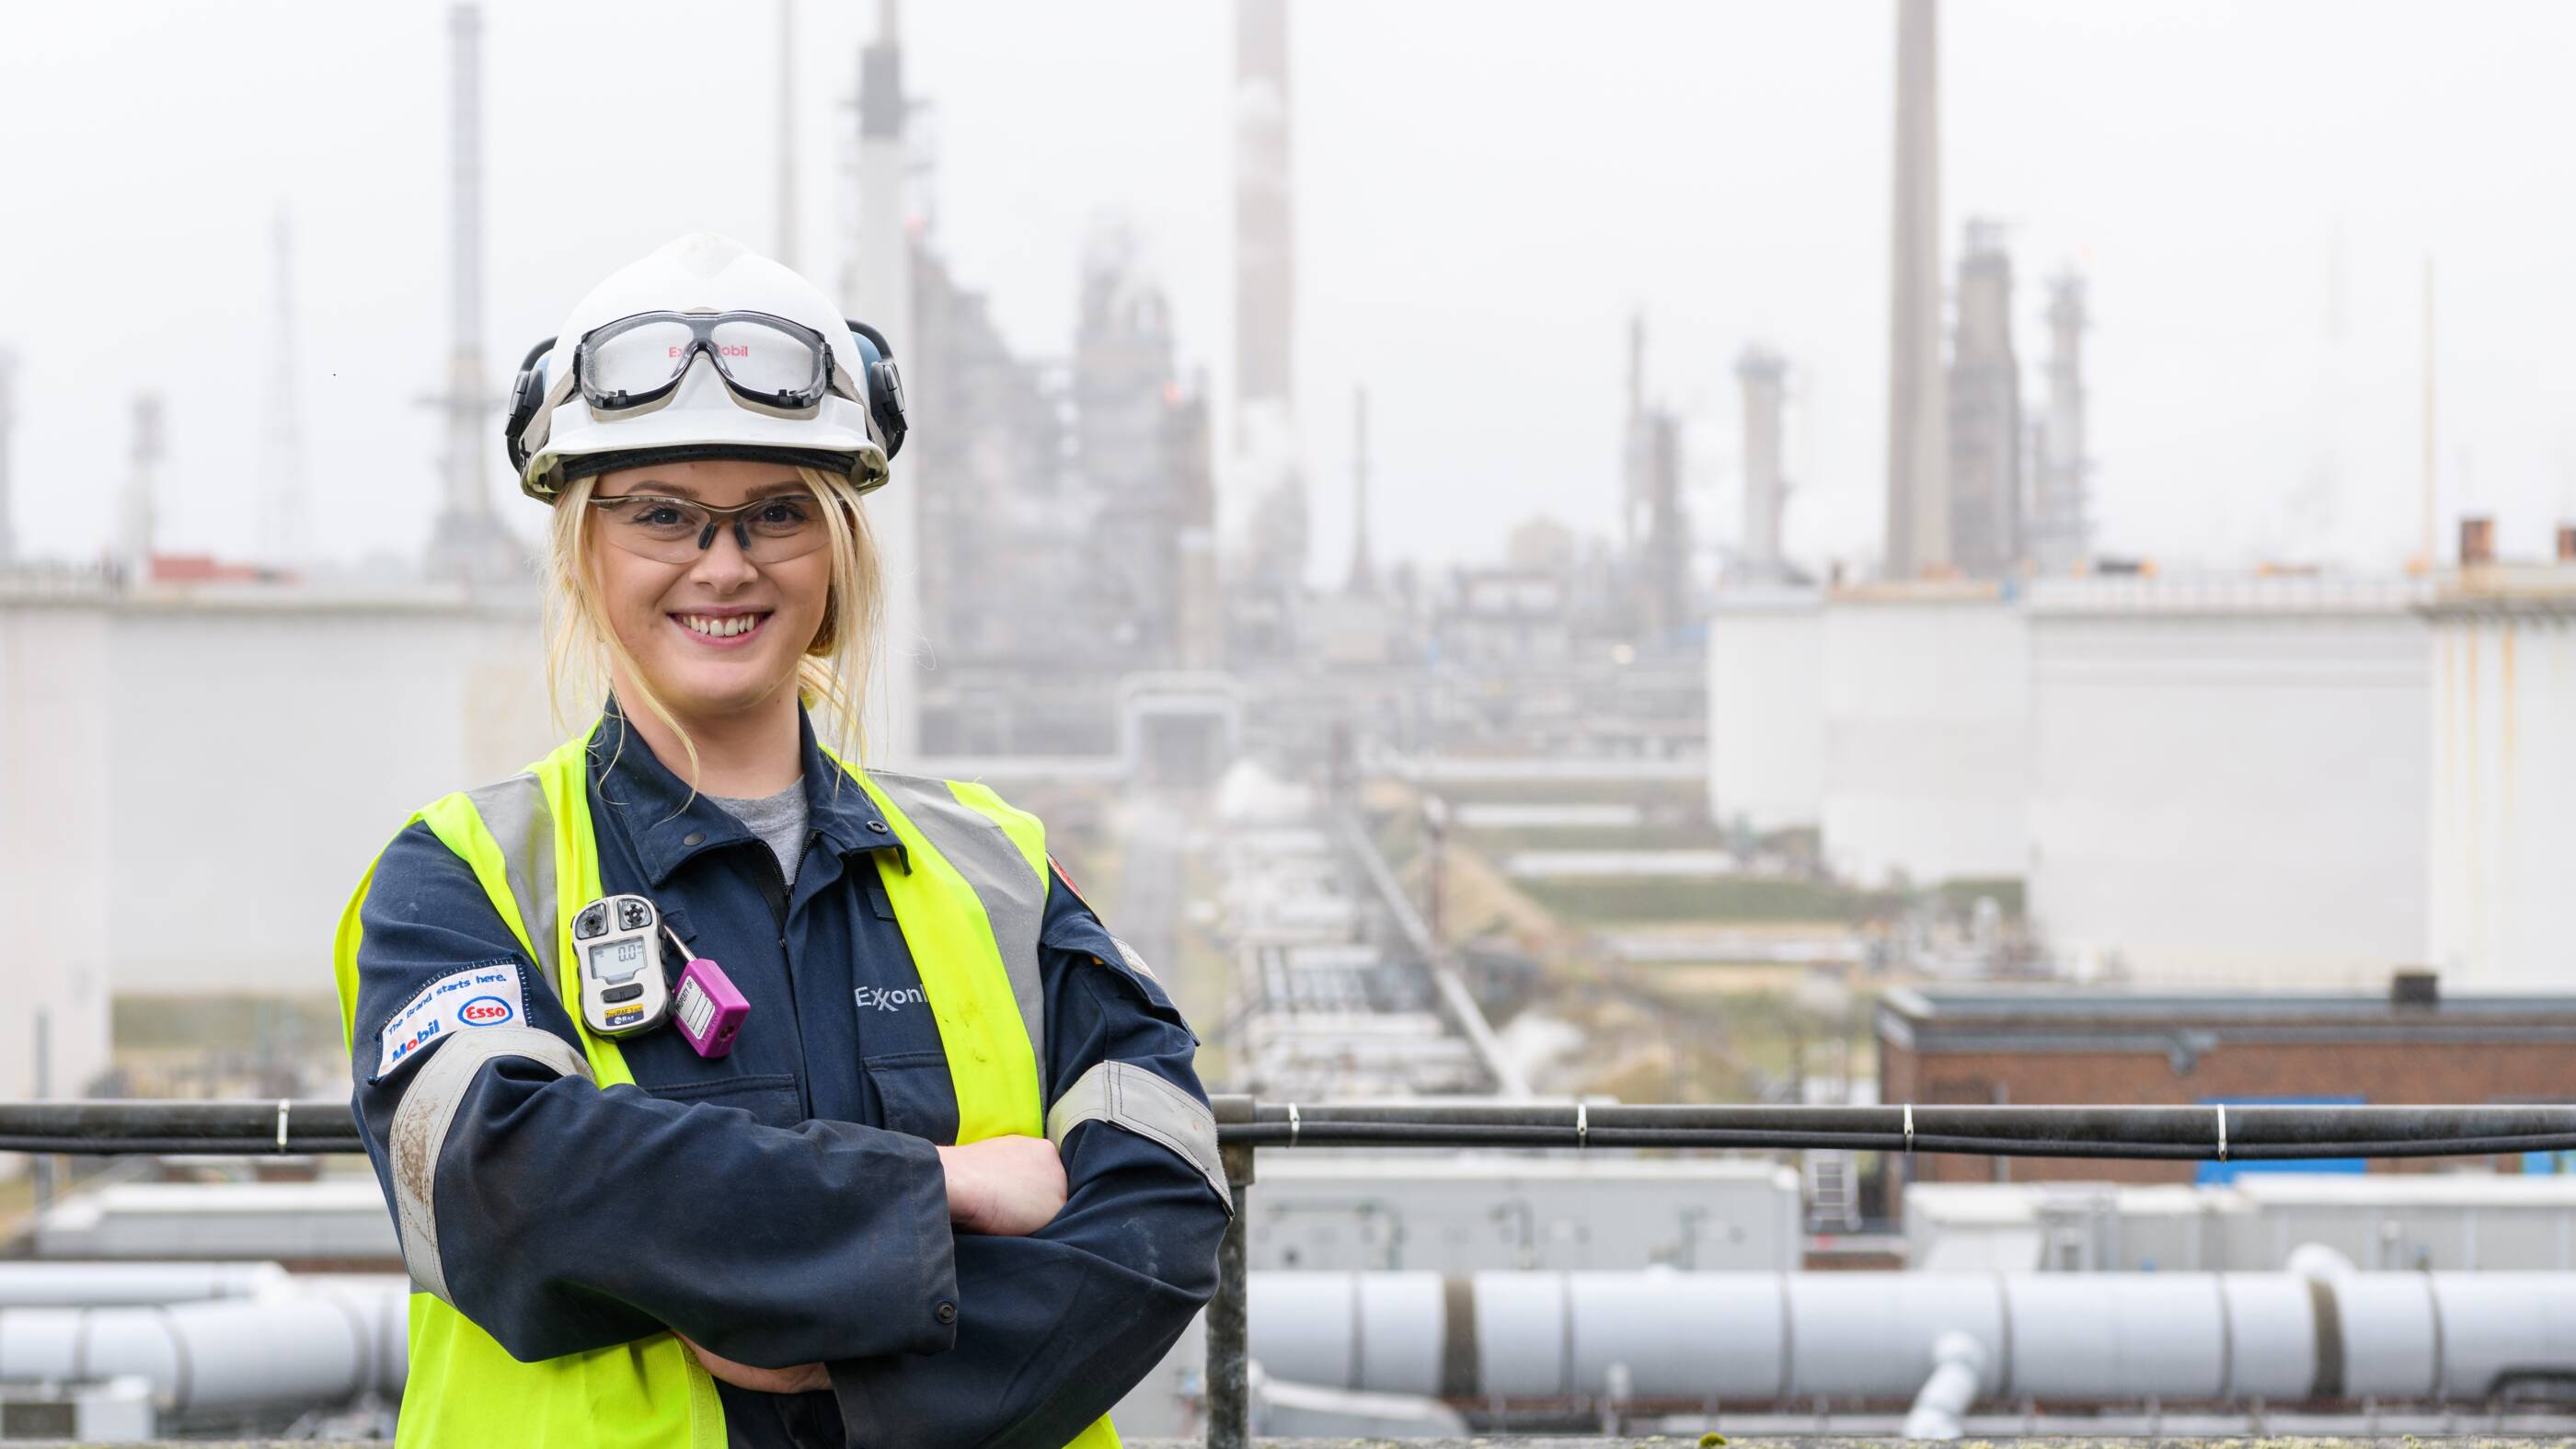 ExxonMobil Fawley is looking for its next generation of apprentices. Despite a challenging few years caused by the pandemic, the company, one of the biggest employers in the Southampton area, is looking to a bright future and recruiting maintenance apprentices.